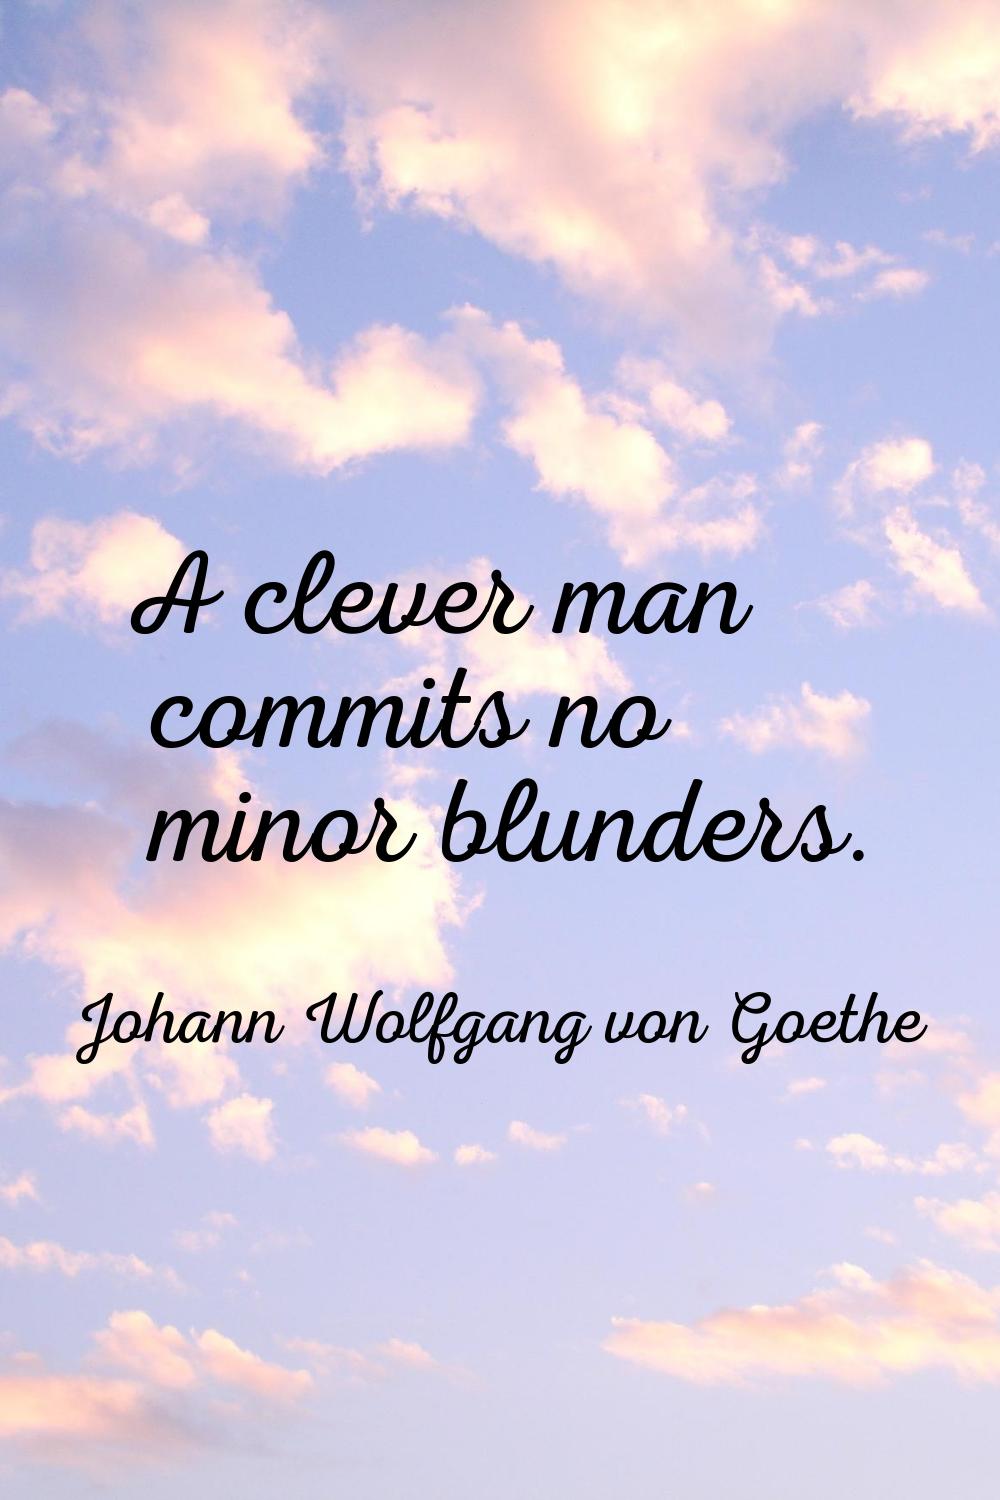 A clever man commits no minor blunders.